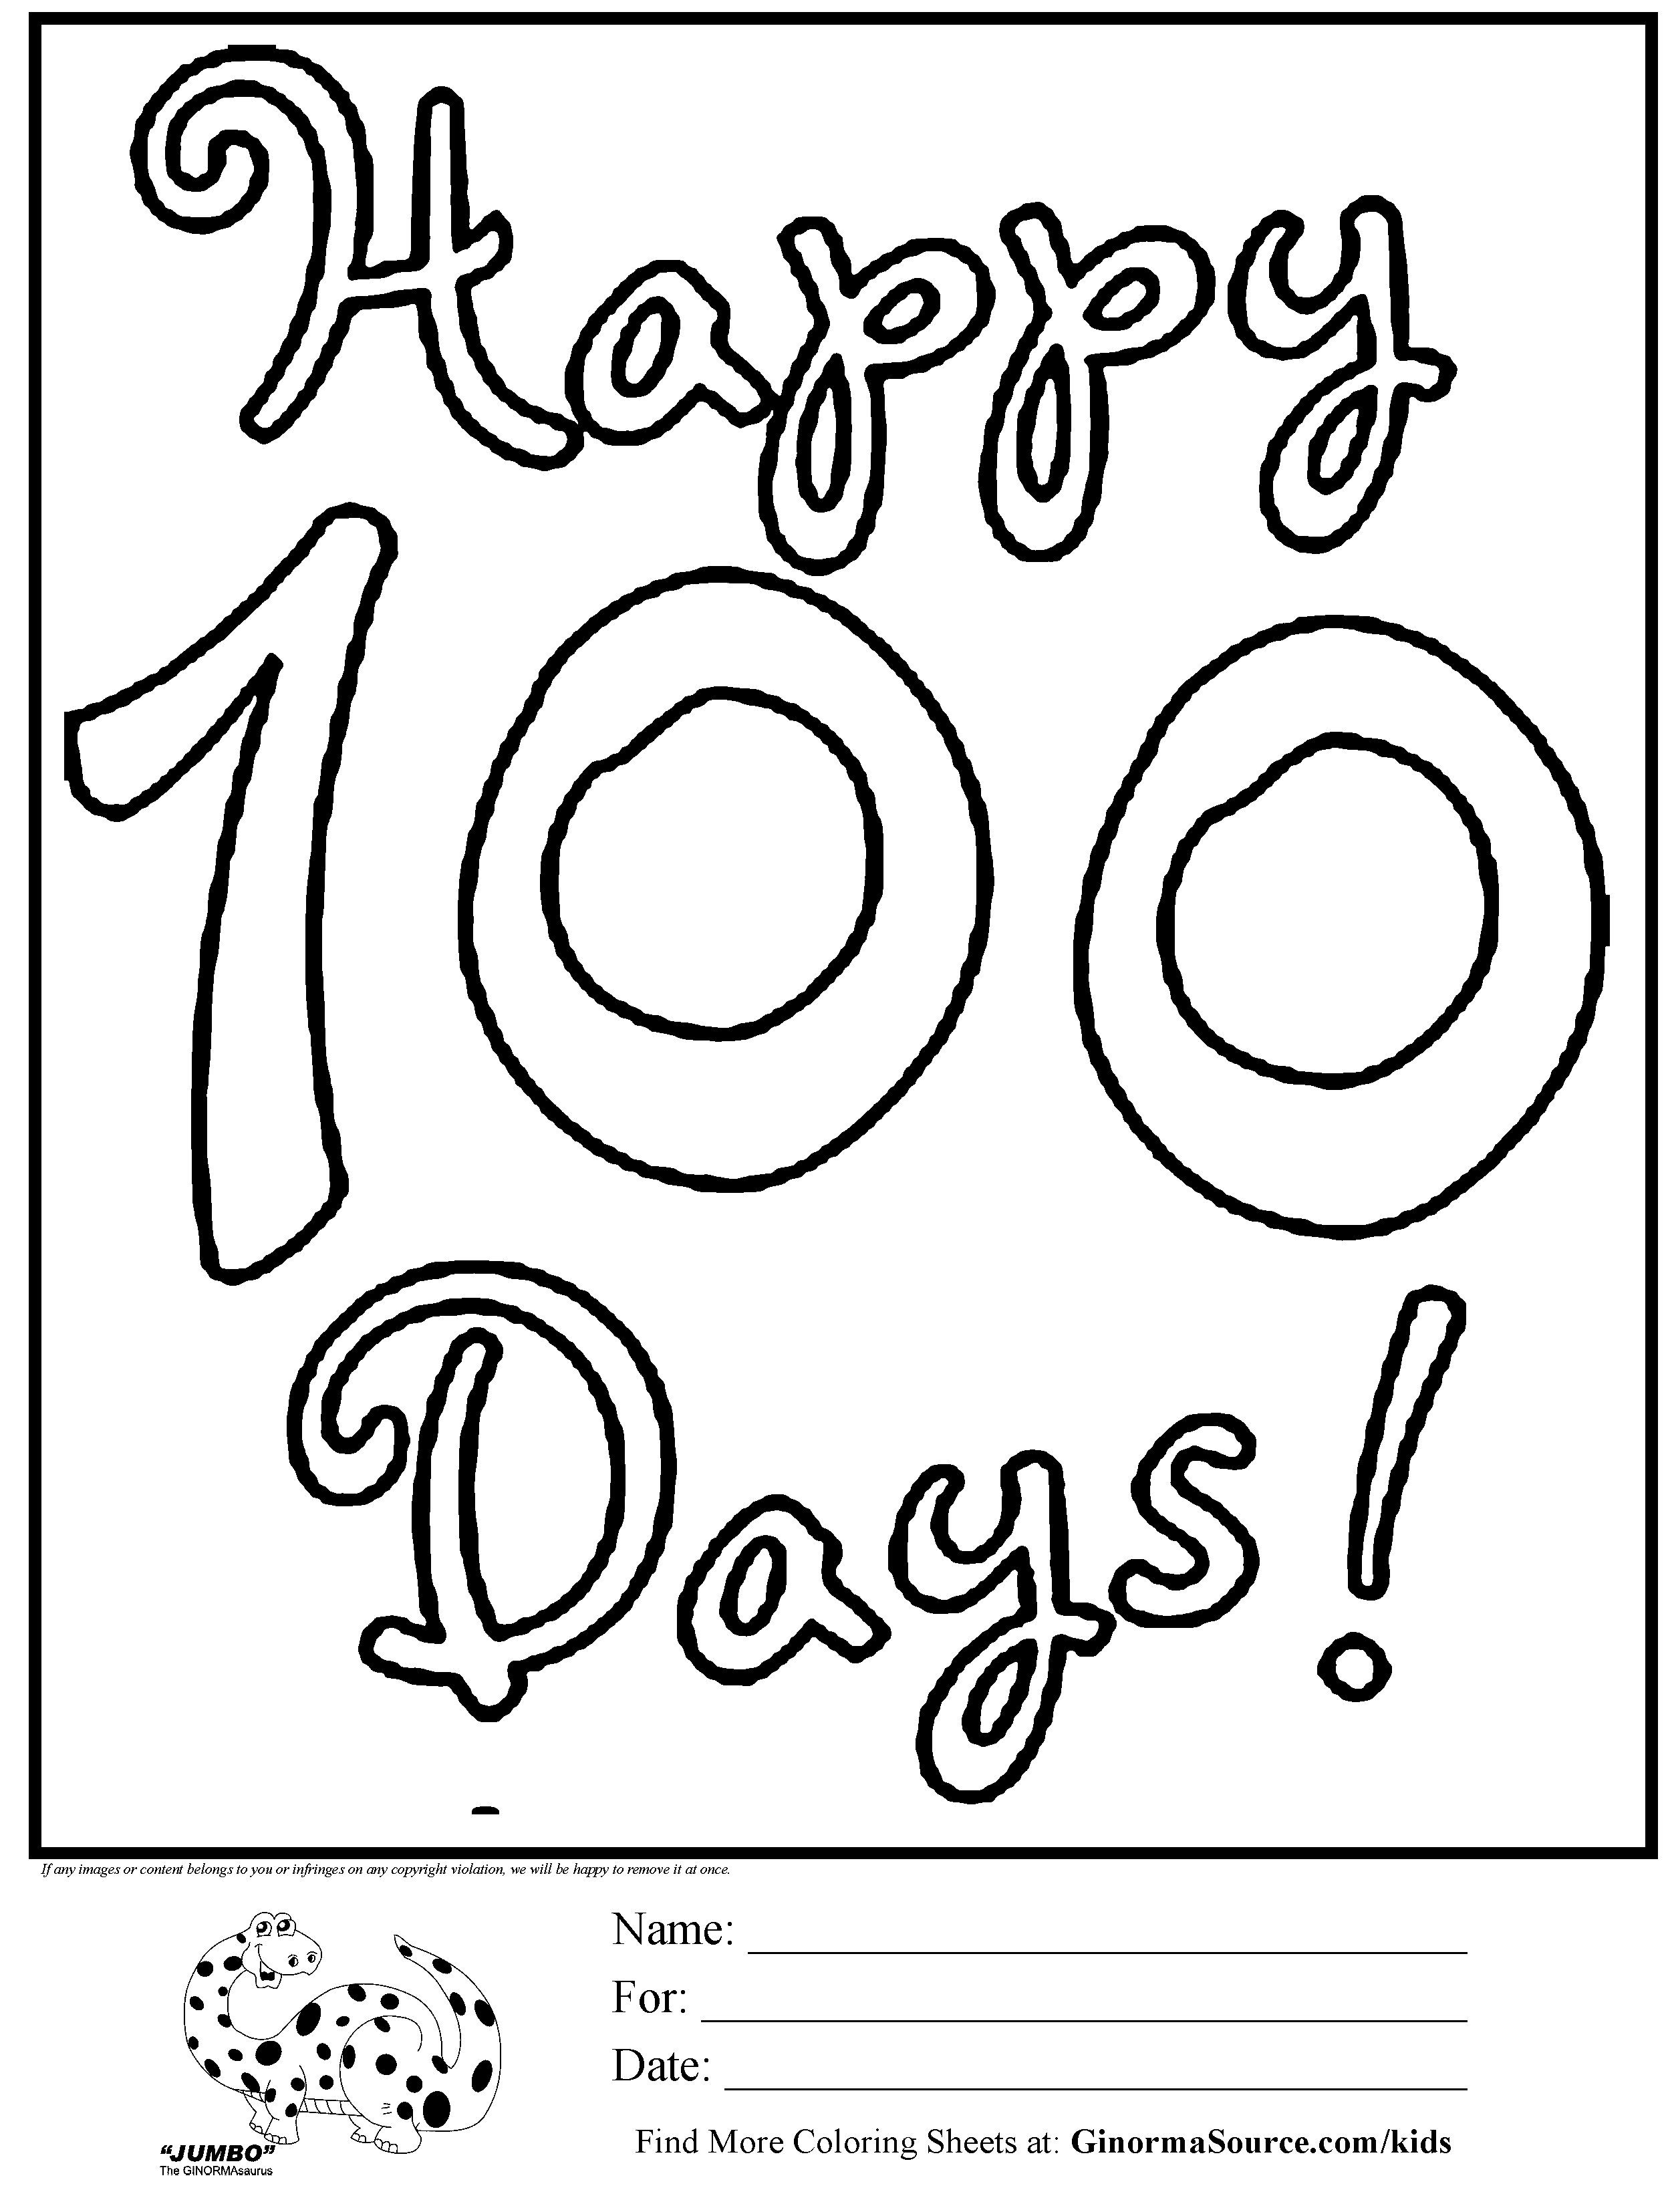 100th-day-of-school-learning-coloring-page-14329644-vector-art-at-vecteezy